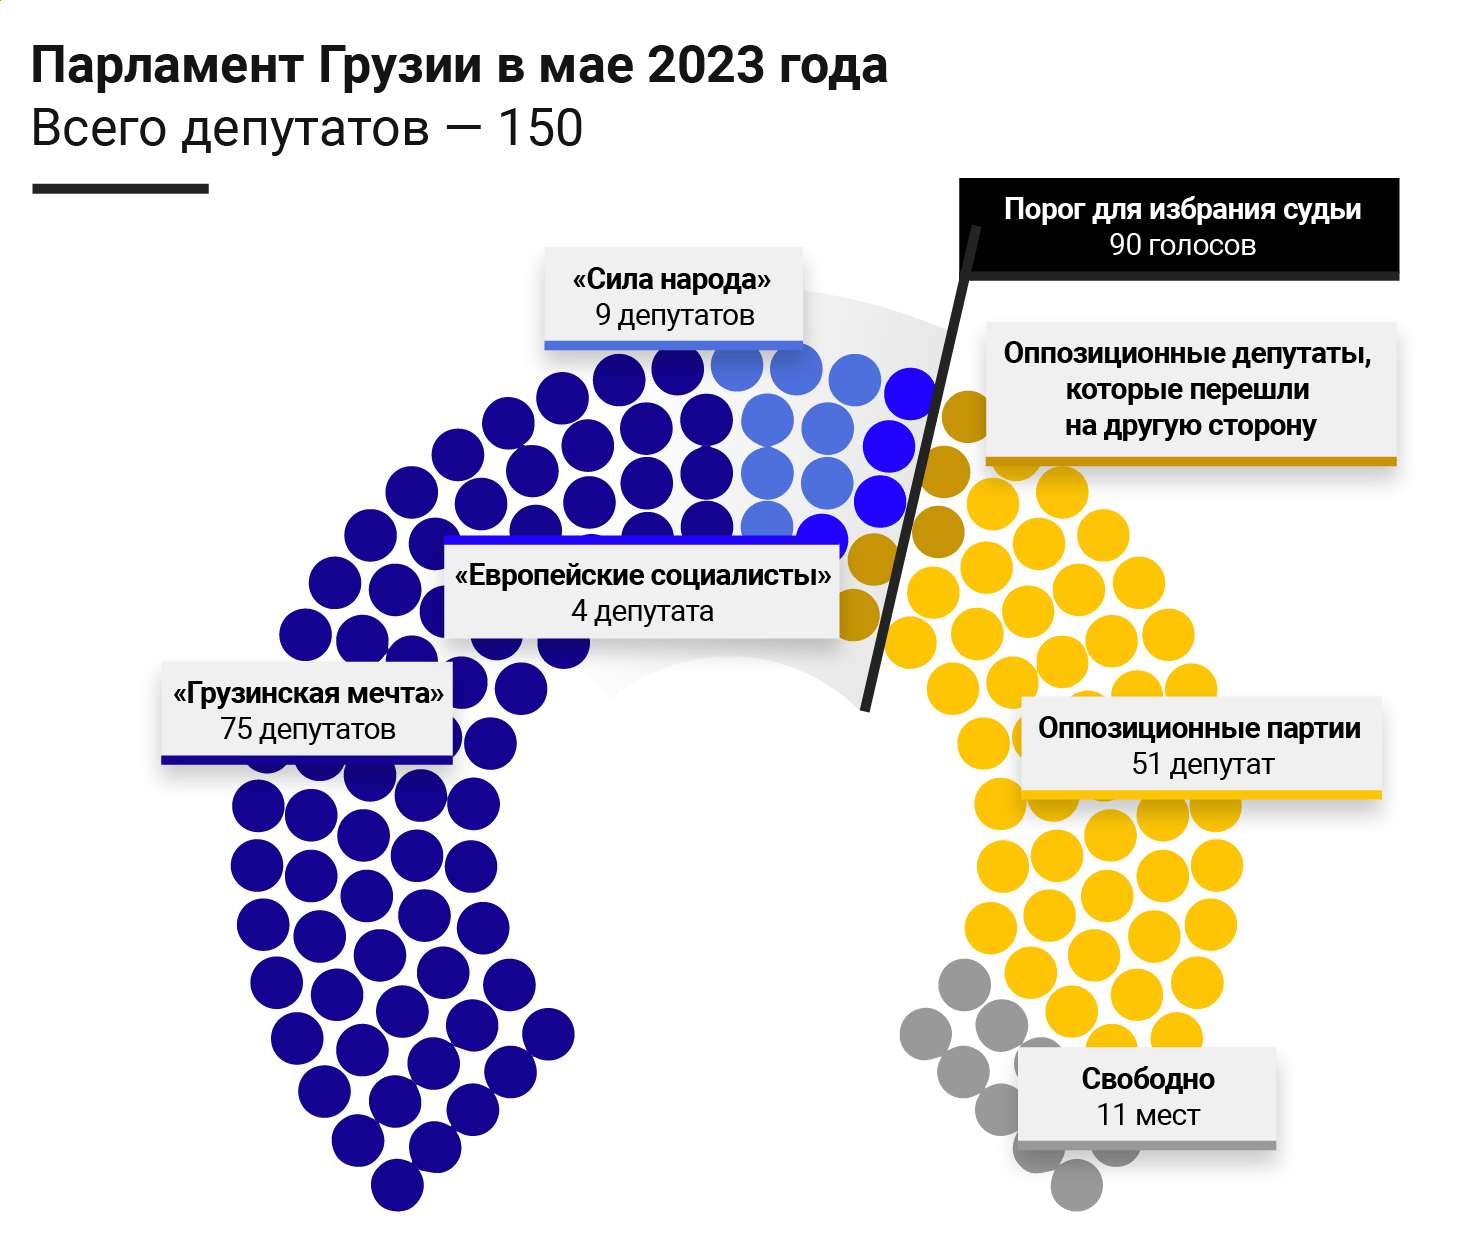 investigations/georgian-voting-infographic-rus.png